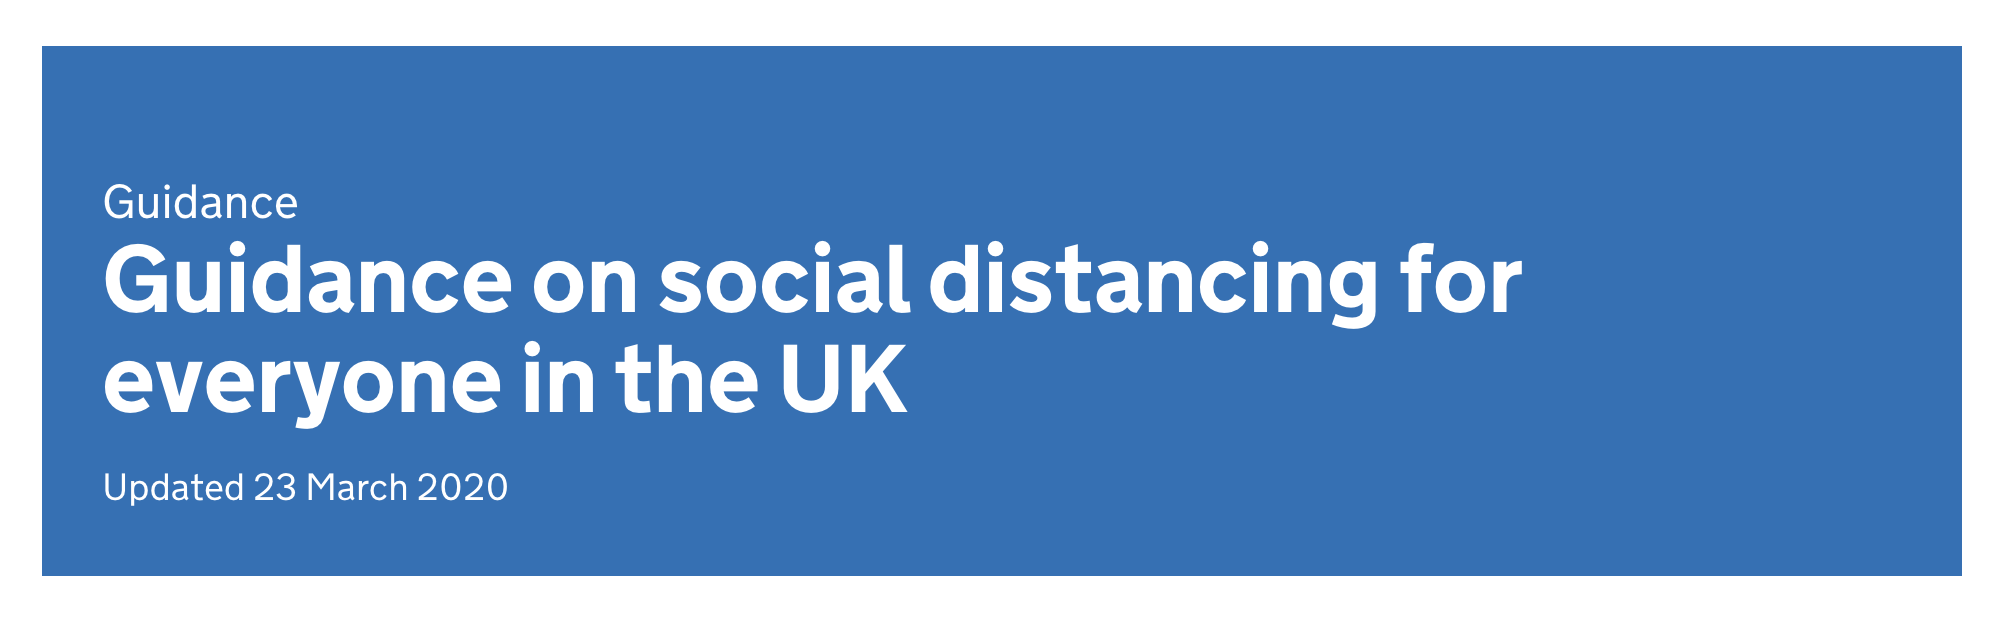 COVID-19 Update : Latest guidance on social distancing for everyone in the UK